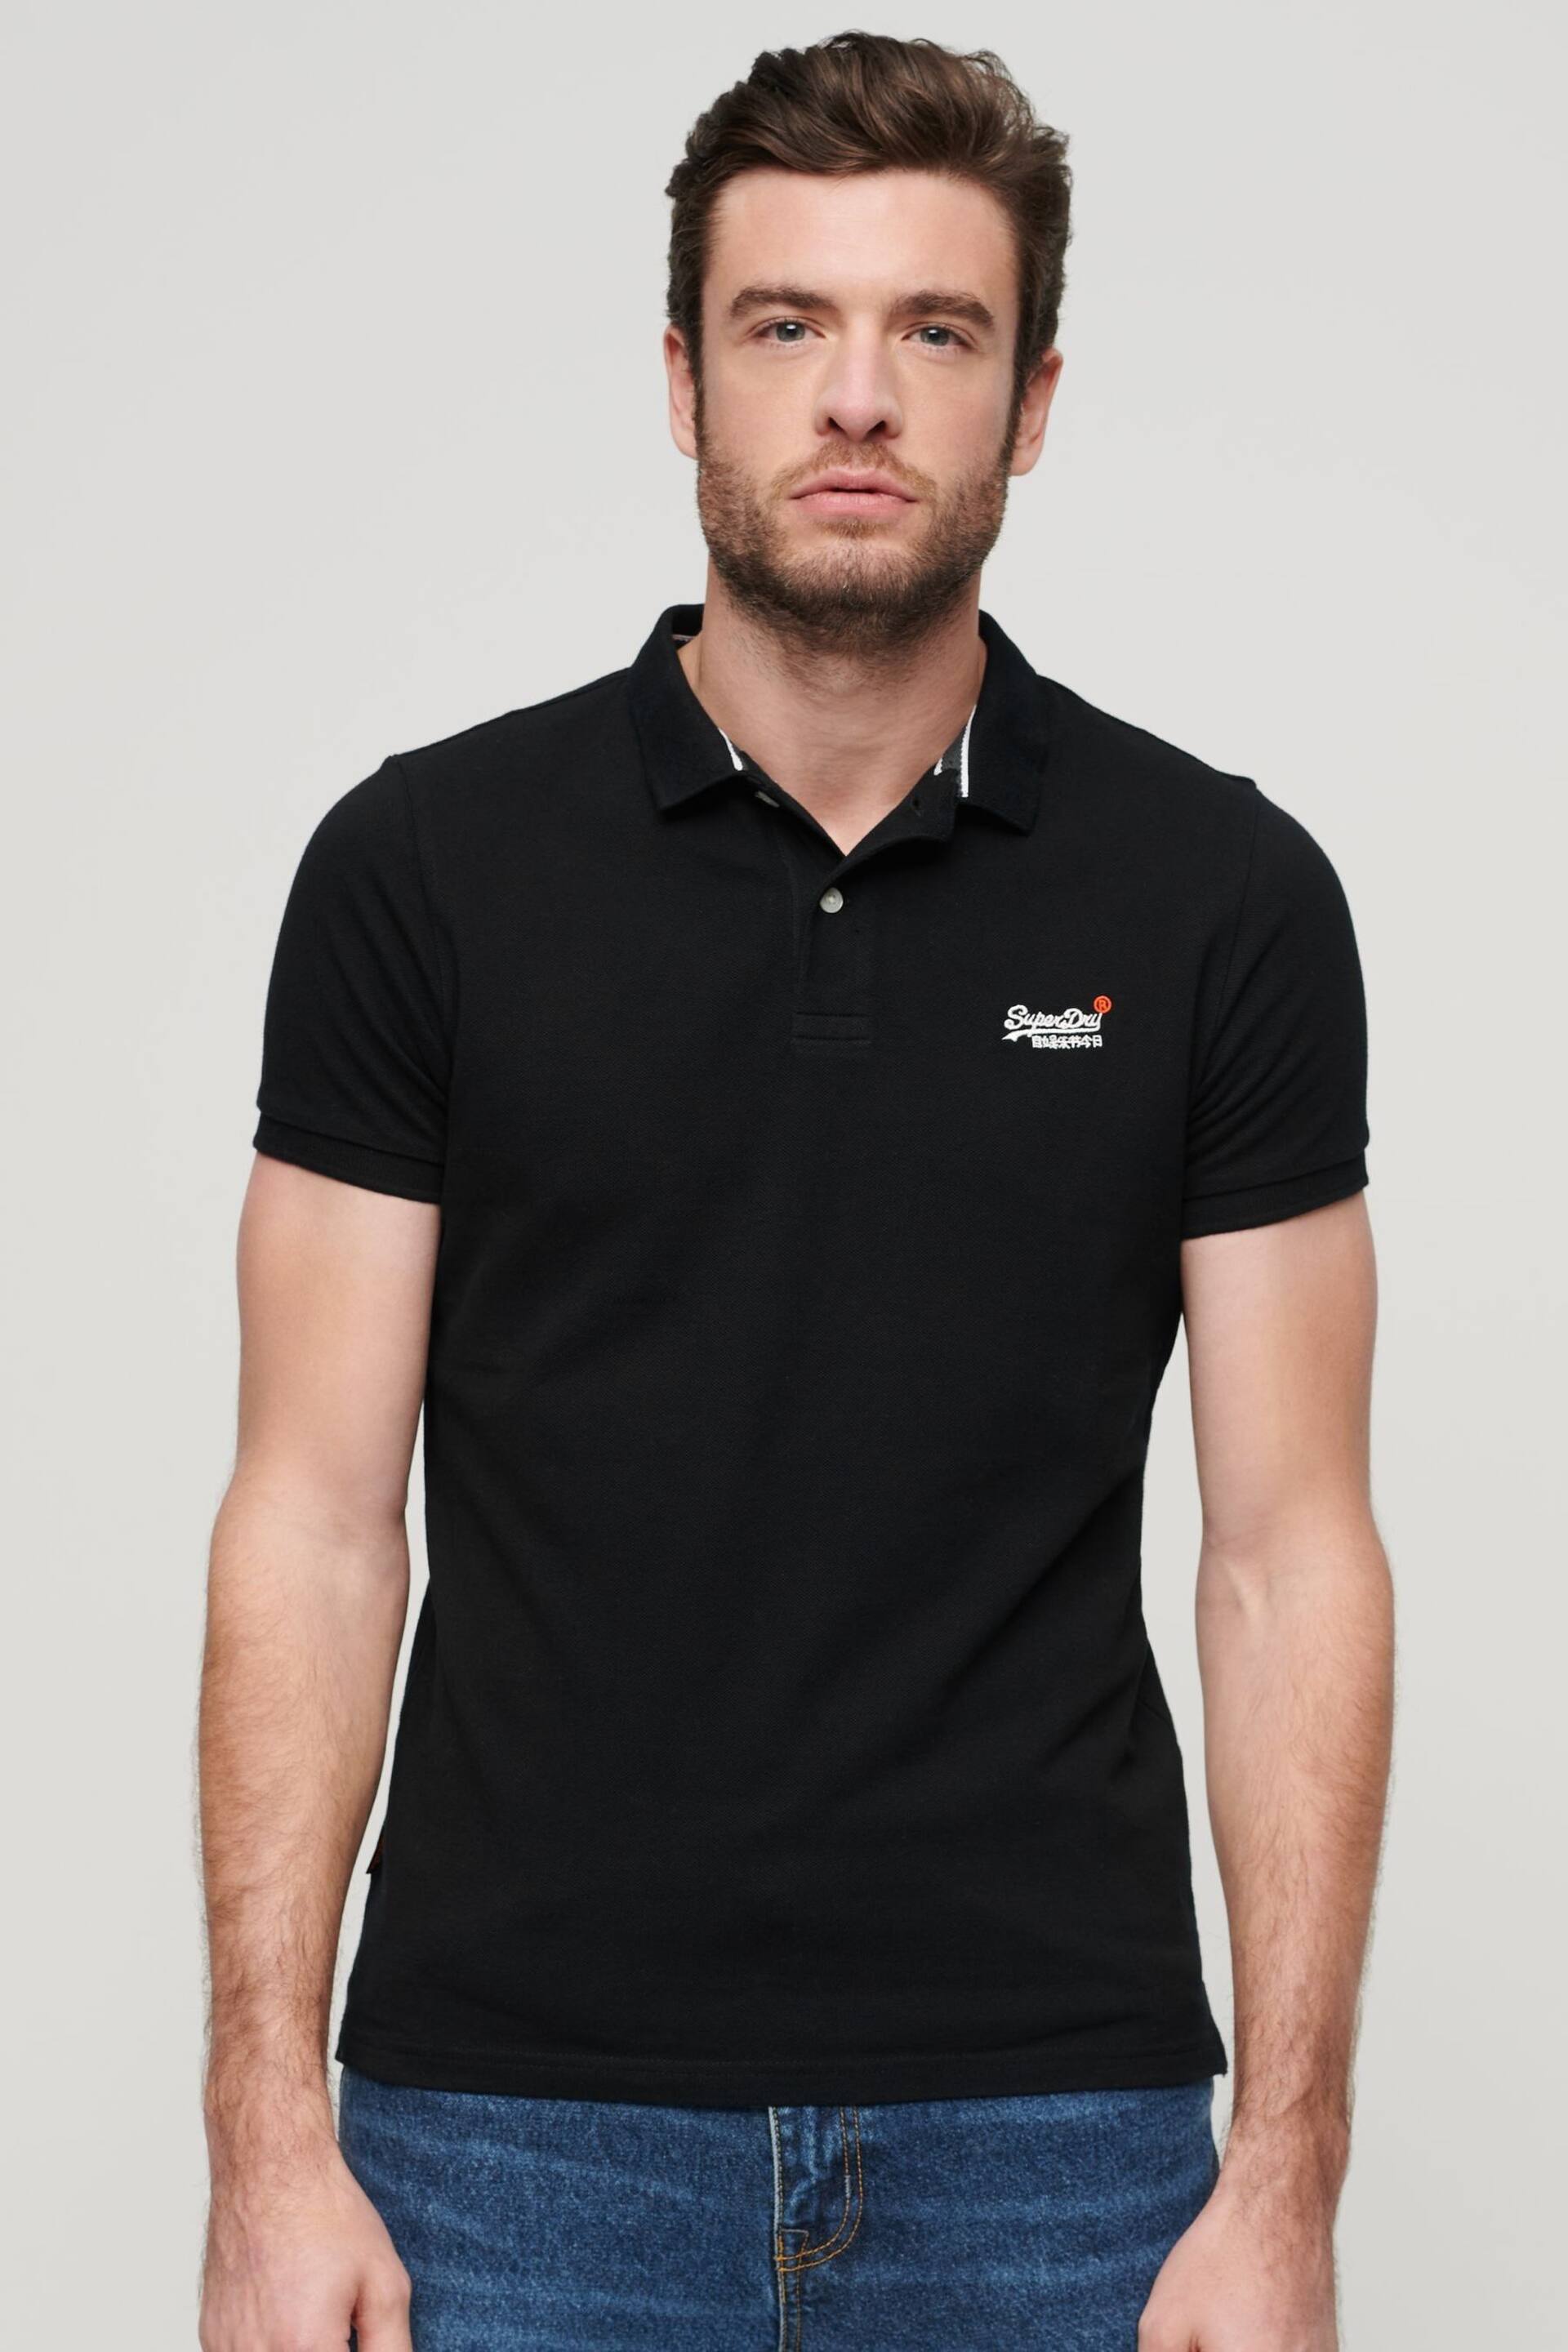 Superdry Black Classic Pique Polo Shirt - Image 5 of 9